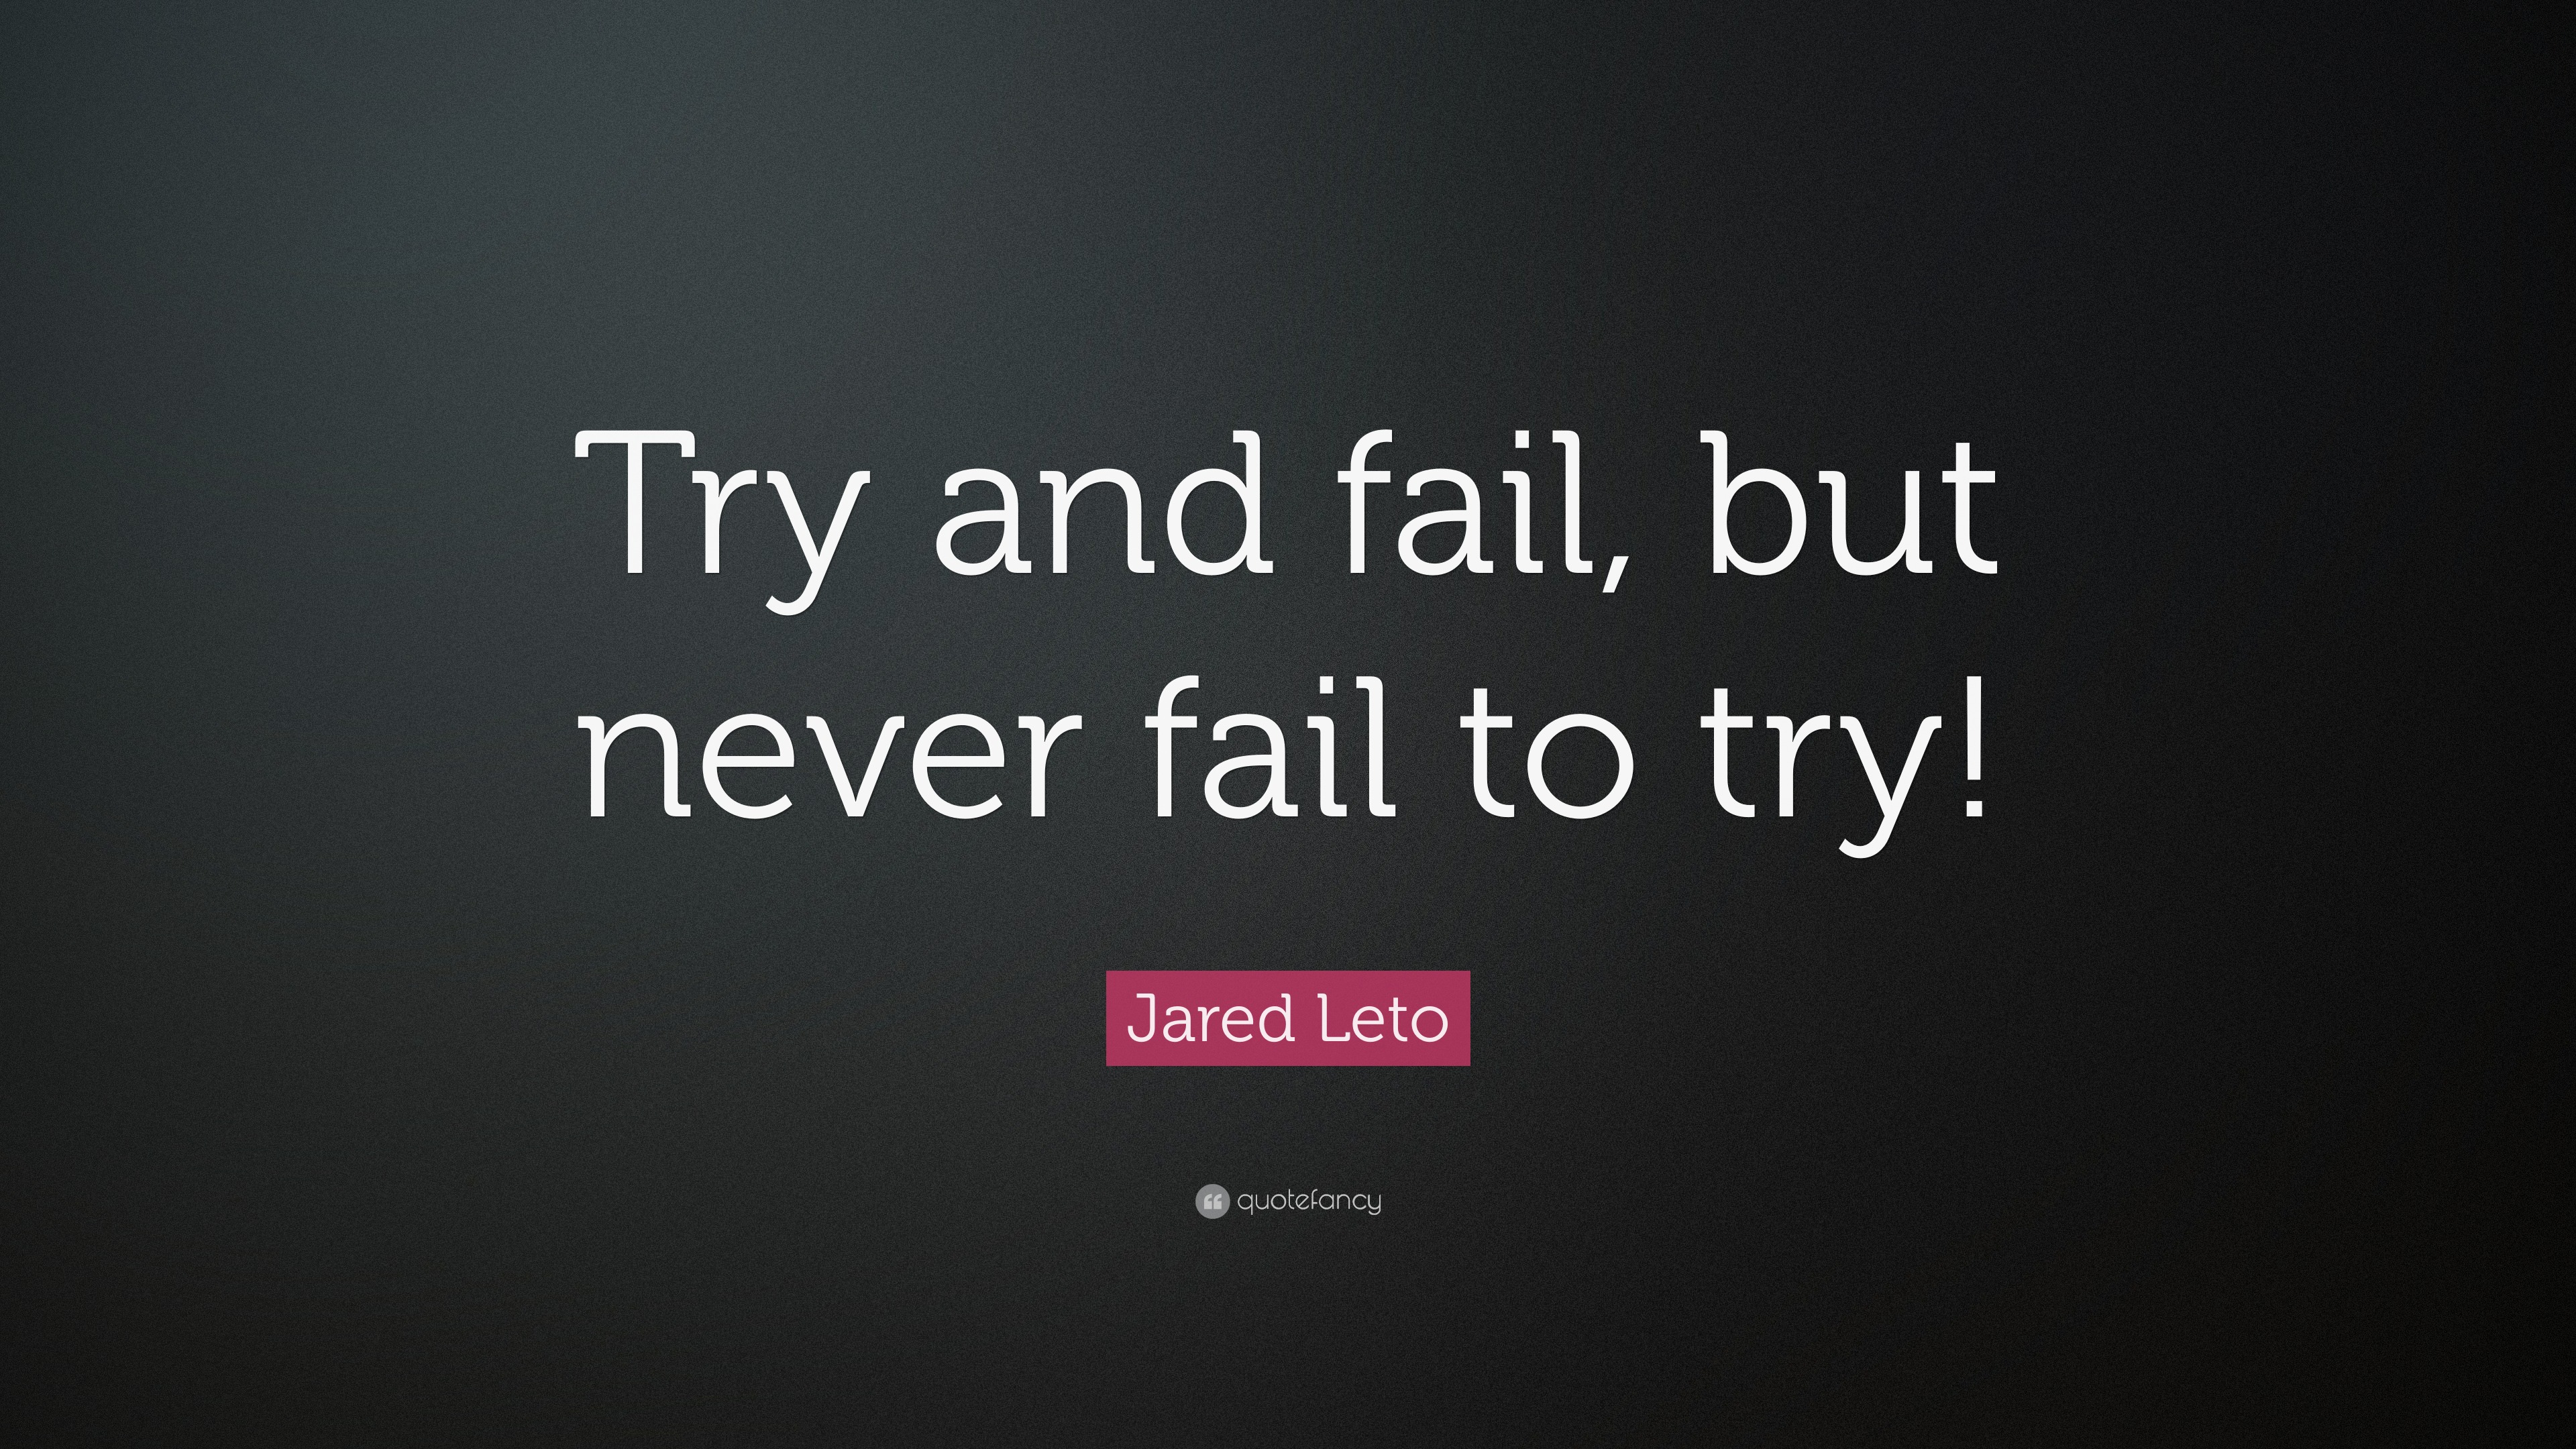 but never fail to try Jared Leto Wall Stickers 40cm x 55cm Decal Try and fail 